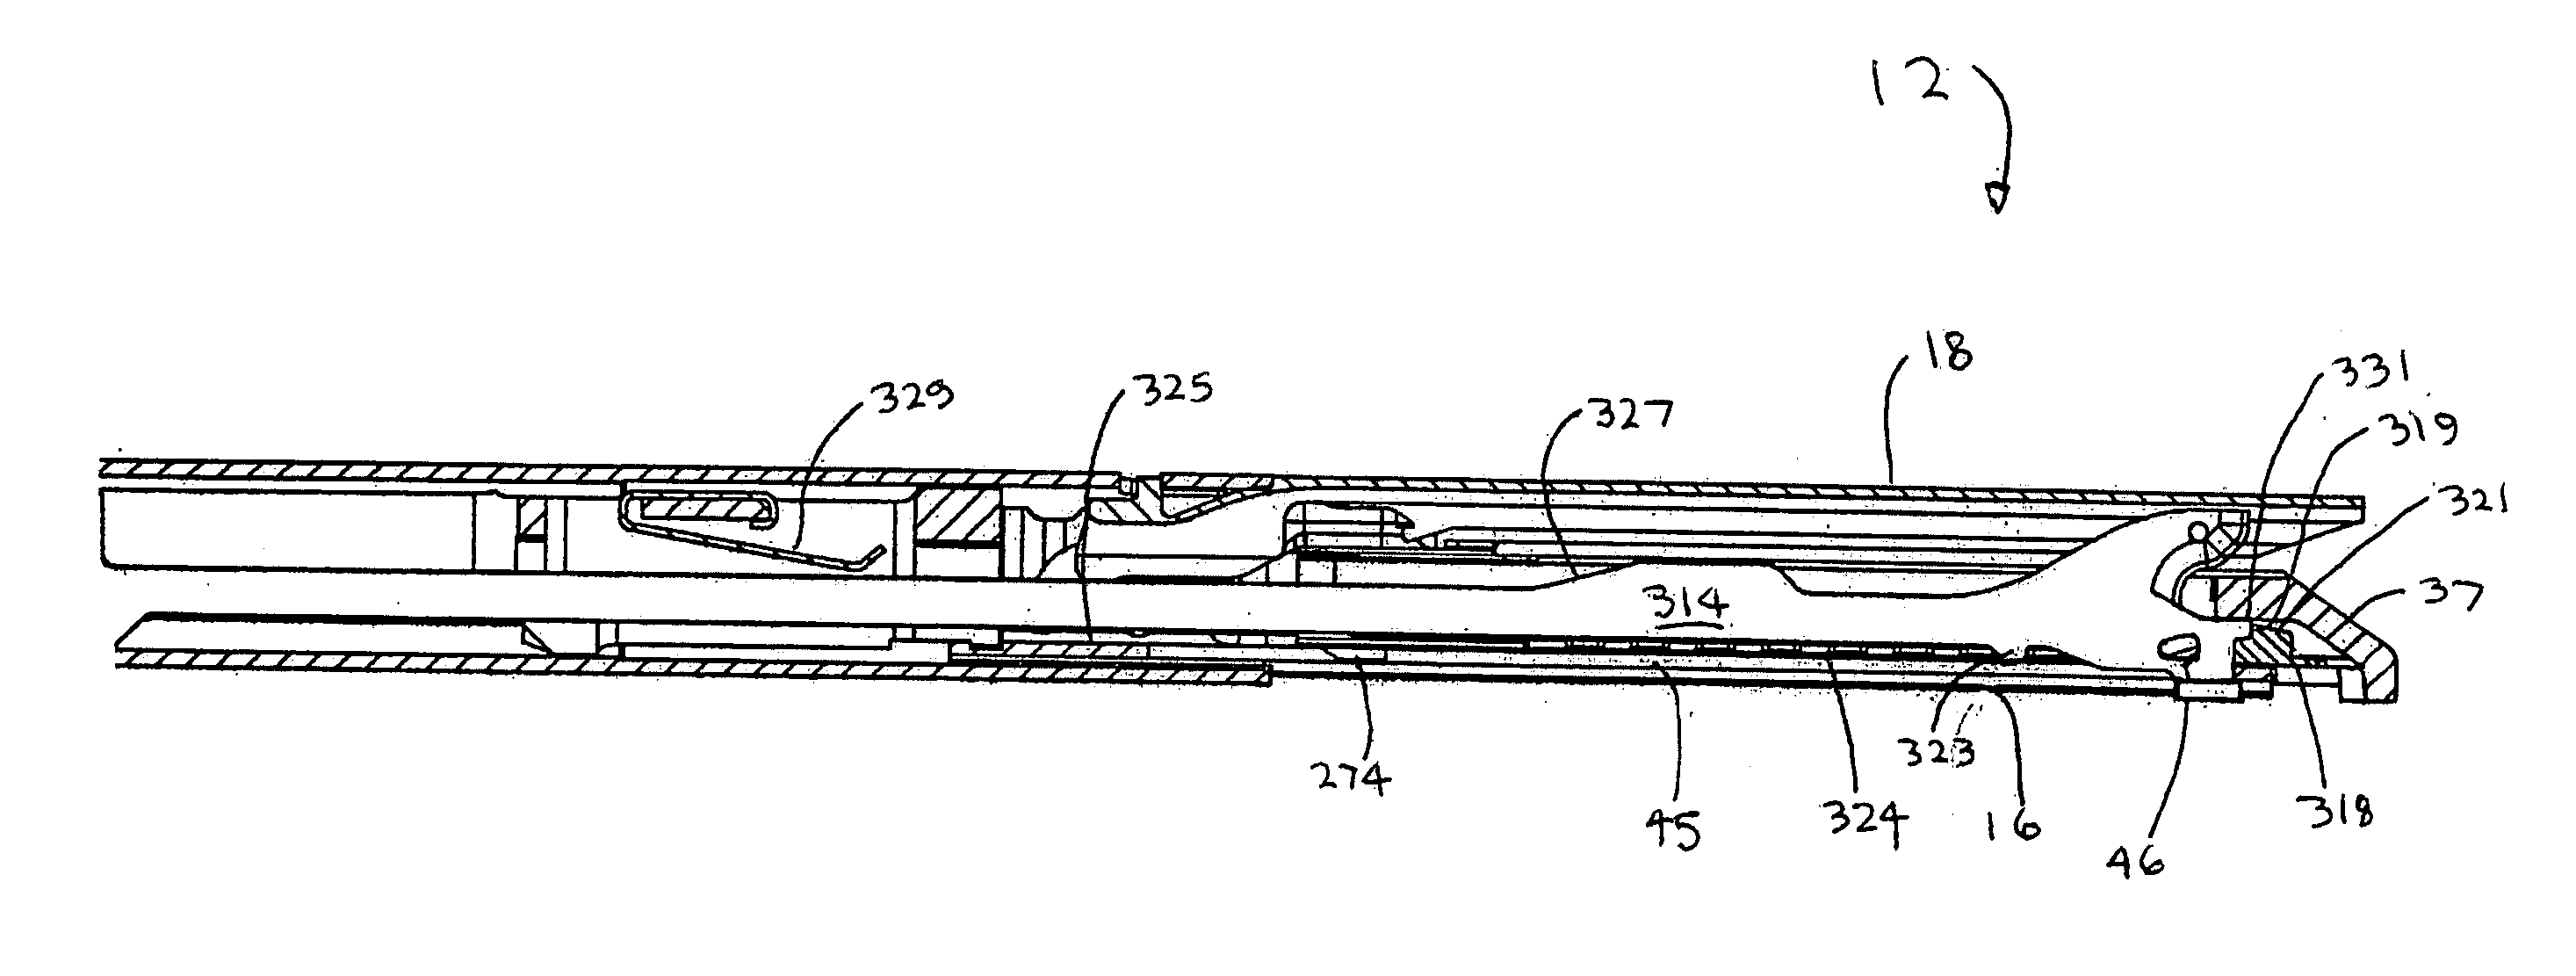 Surgical stapling instrument having a single lockout mechanism for prevention of firing